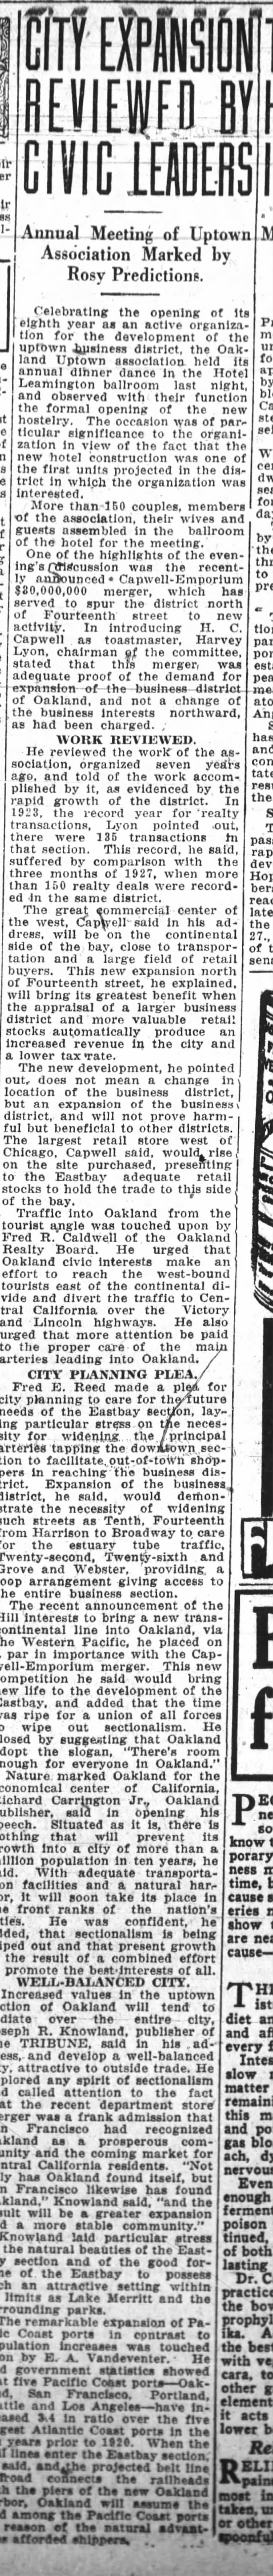 City Expansion Reviewed by Civic  Leaders - Apr 06, 1927 - 